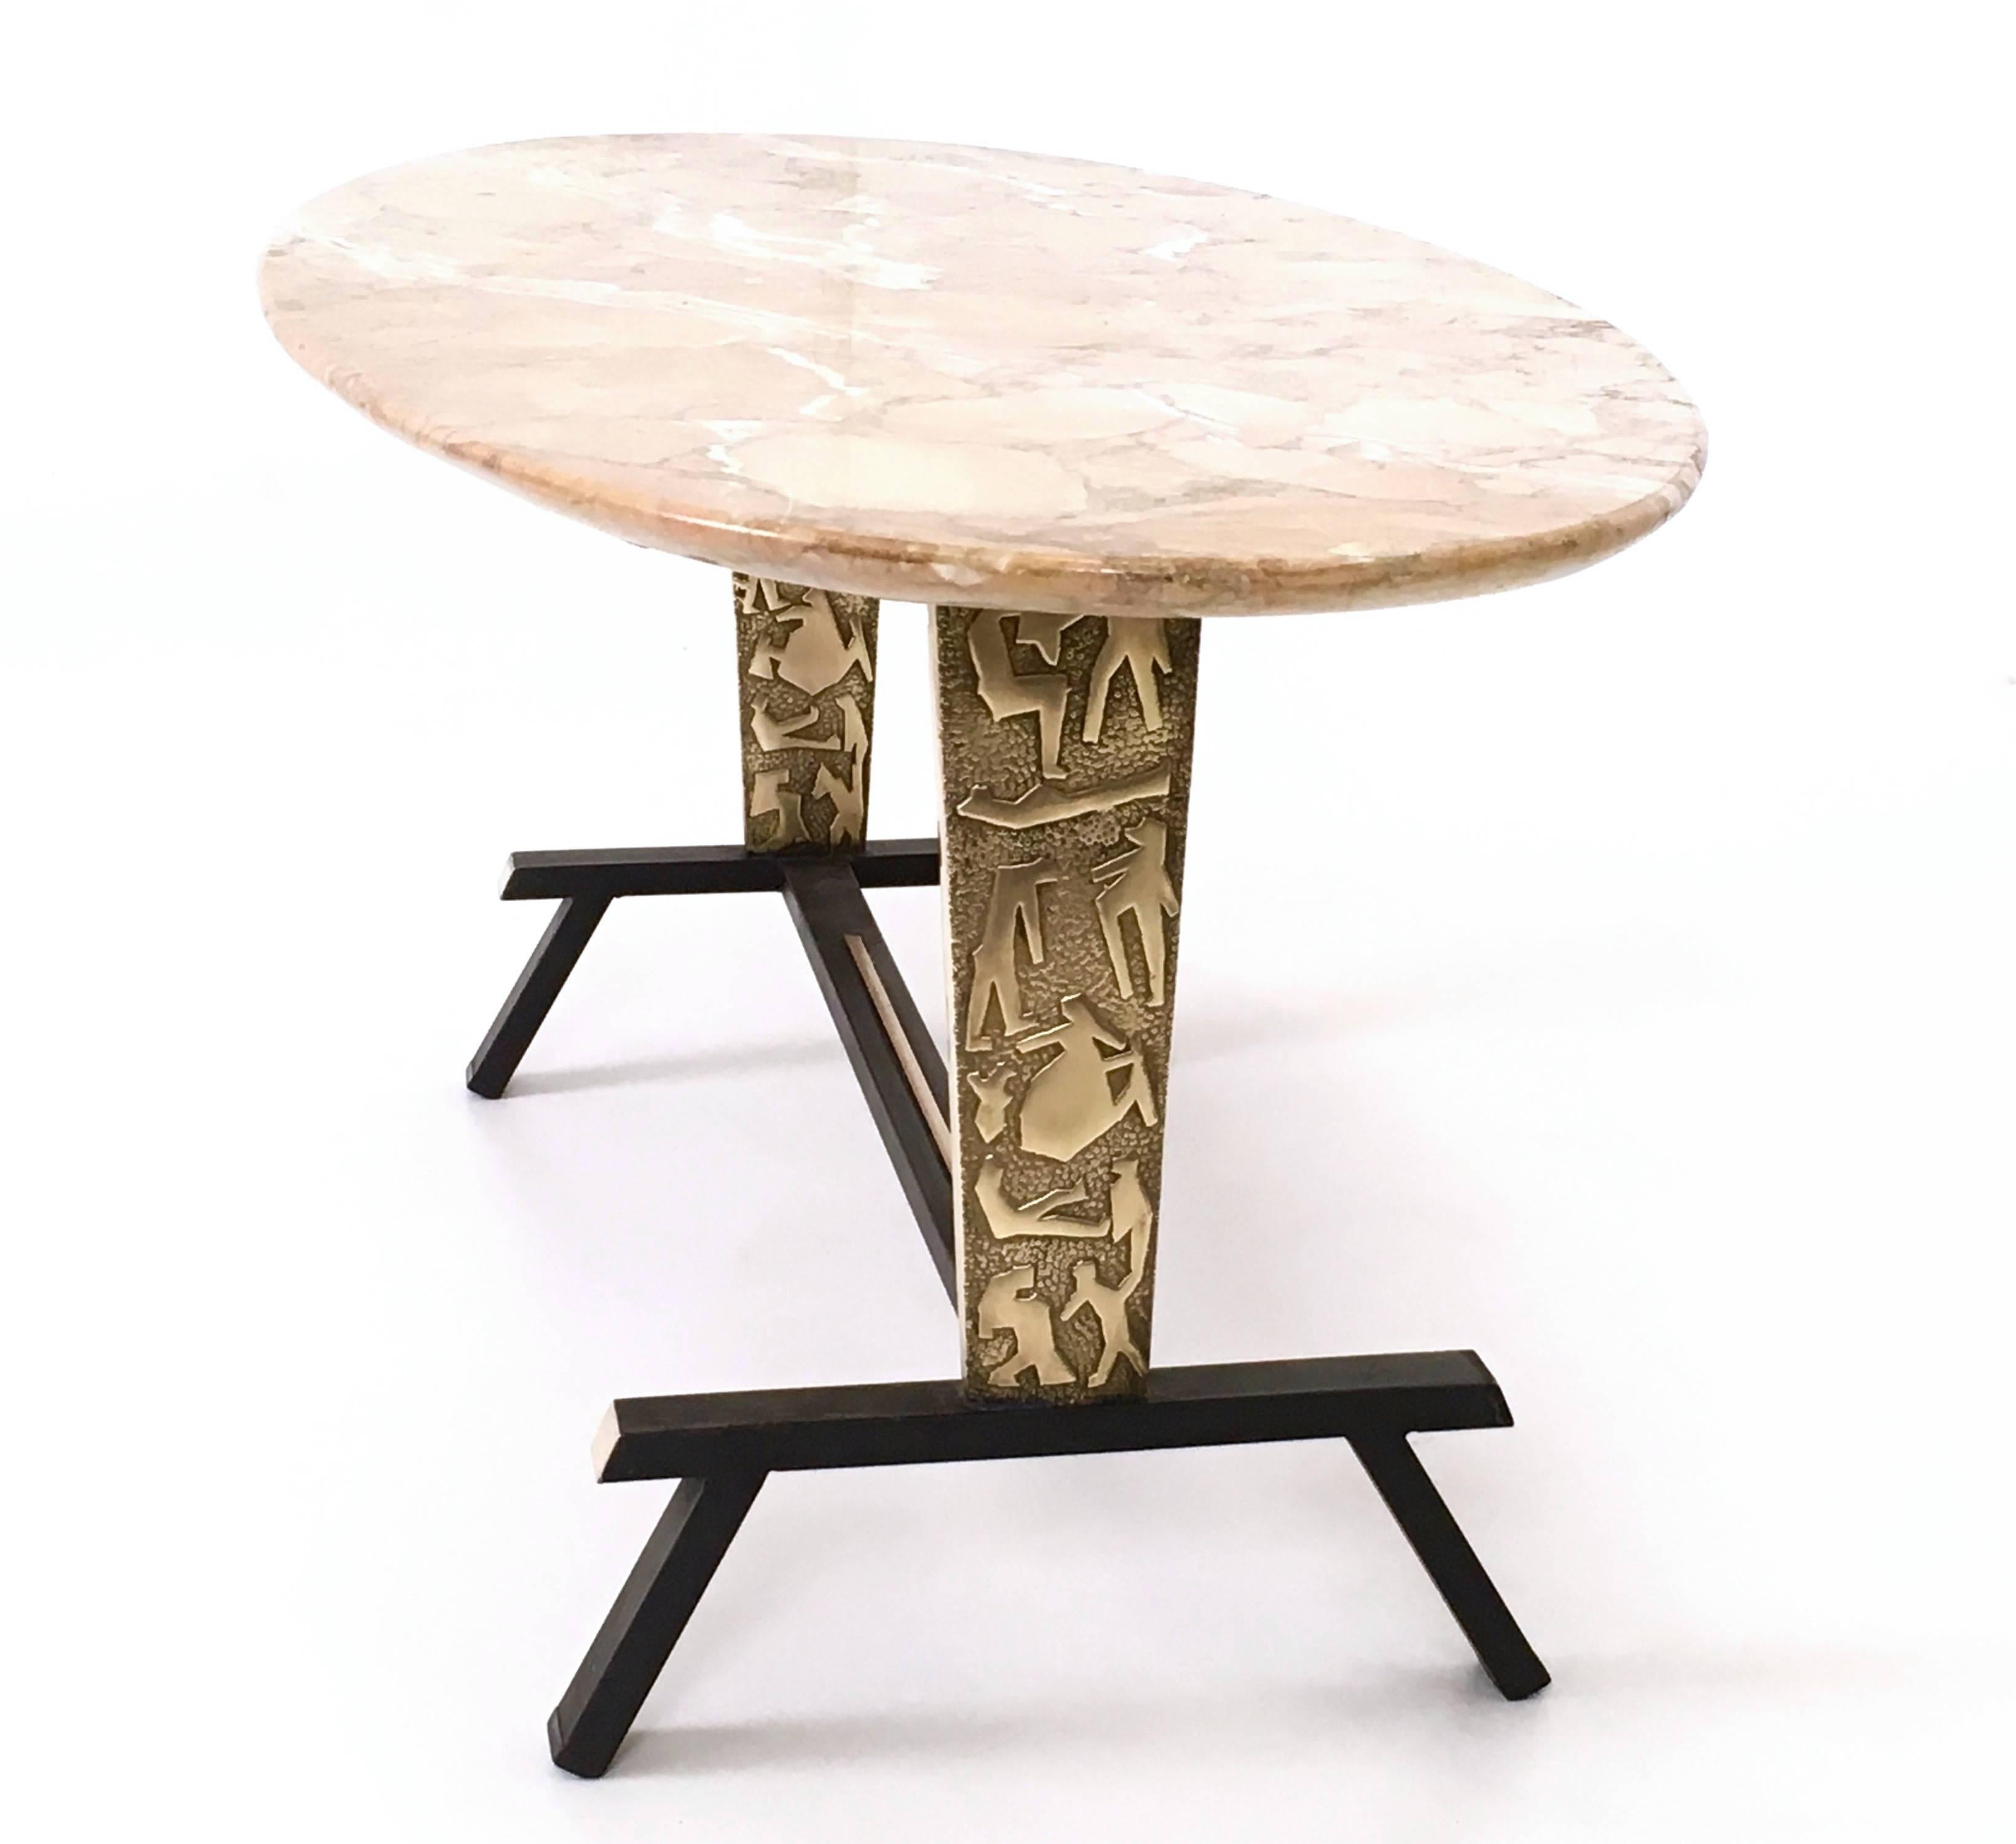 Italian Coffee Table with Cast Brass Legs and an Oval Pink Marble Top, Italy, 1950s